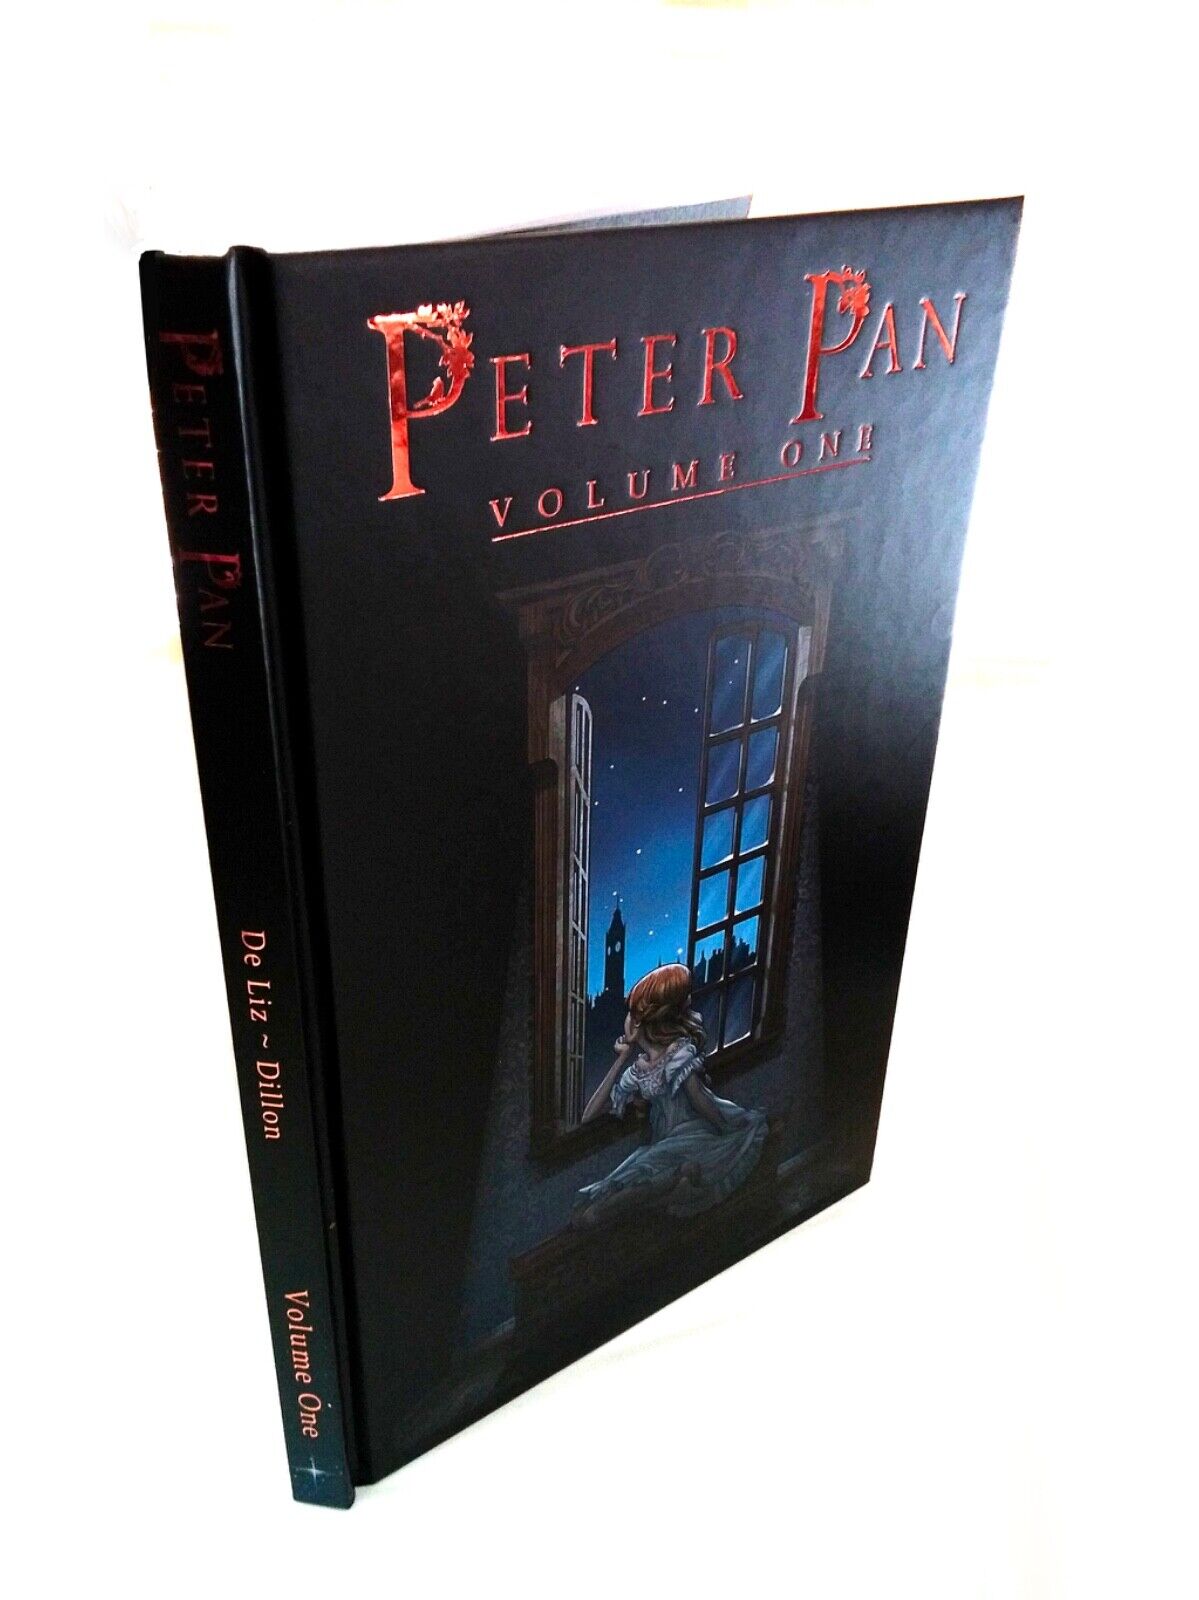 RARE Peter Pan: The Graphic Novel - Volume 1 (Signed Hardcover)